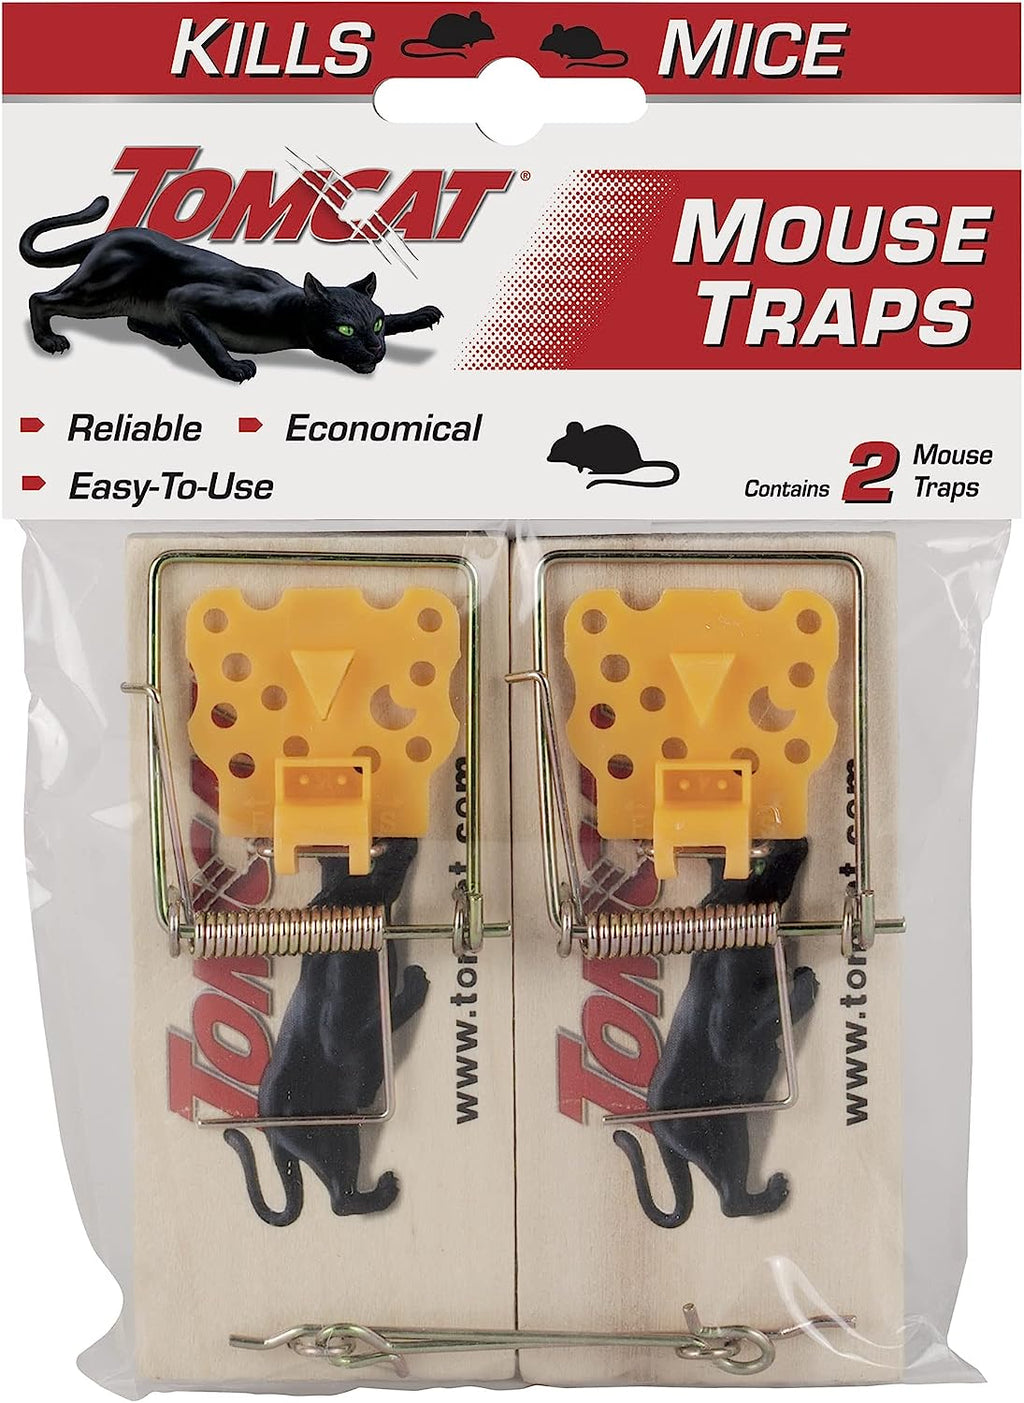 10 Wooden Mouse Traps | Quick Kill | Inexpensive & Effective